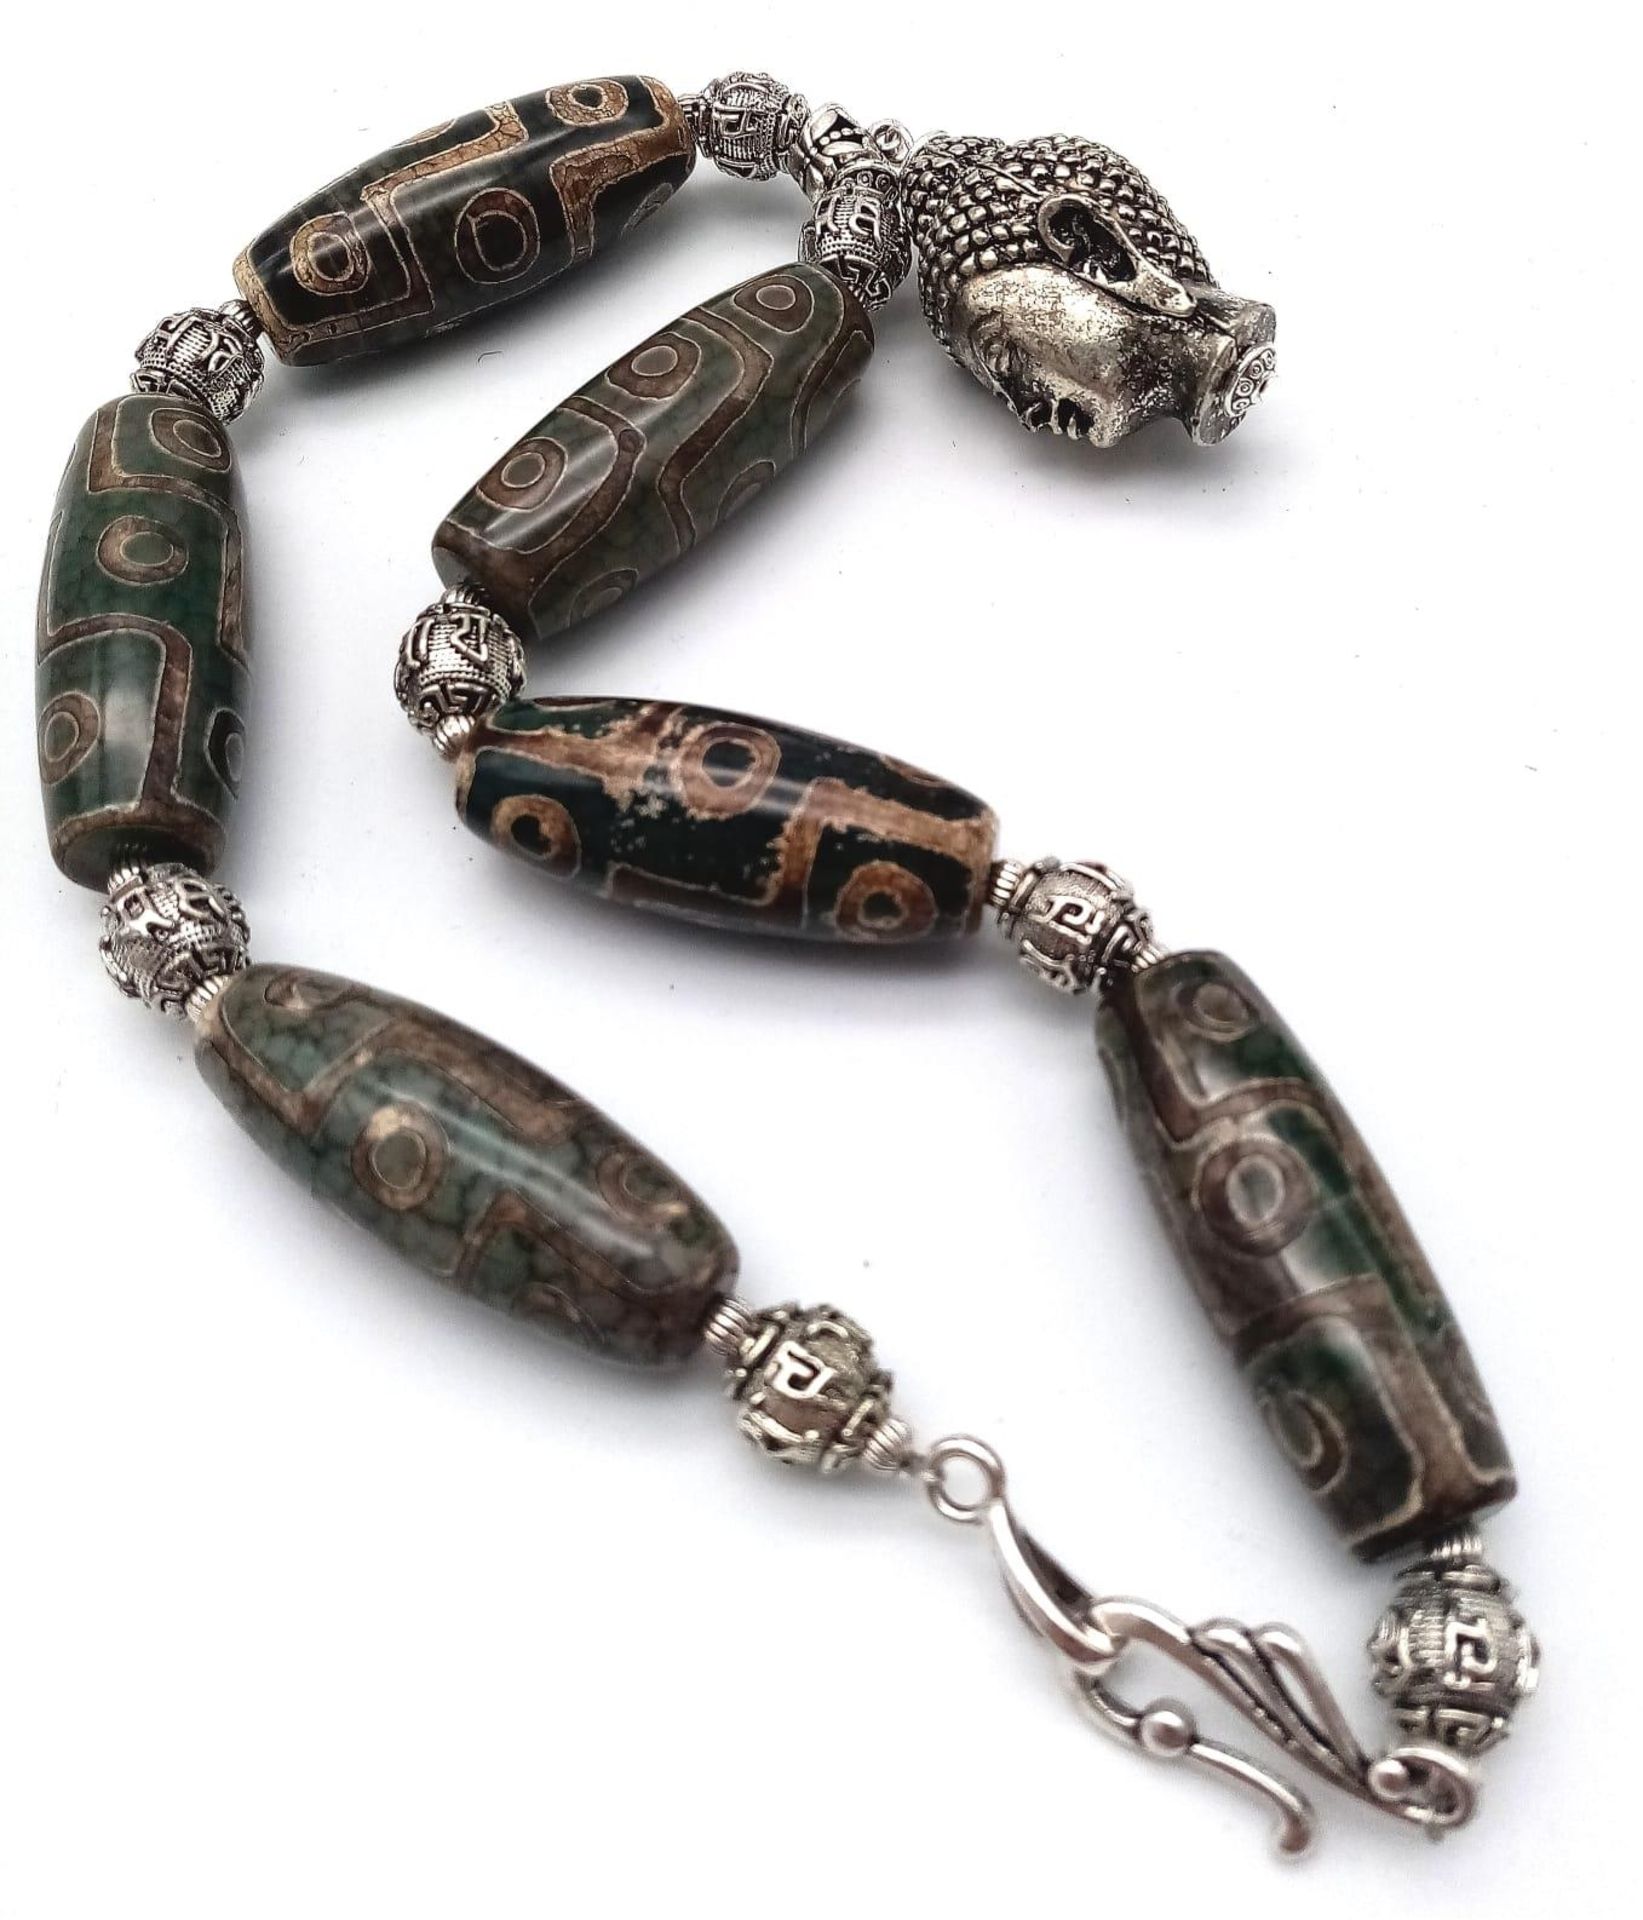 A Tibetan treasure: a nine eyed, large DZI beaded necklace and earrings set with a young Buddha head - Image 4 of 7